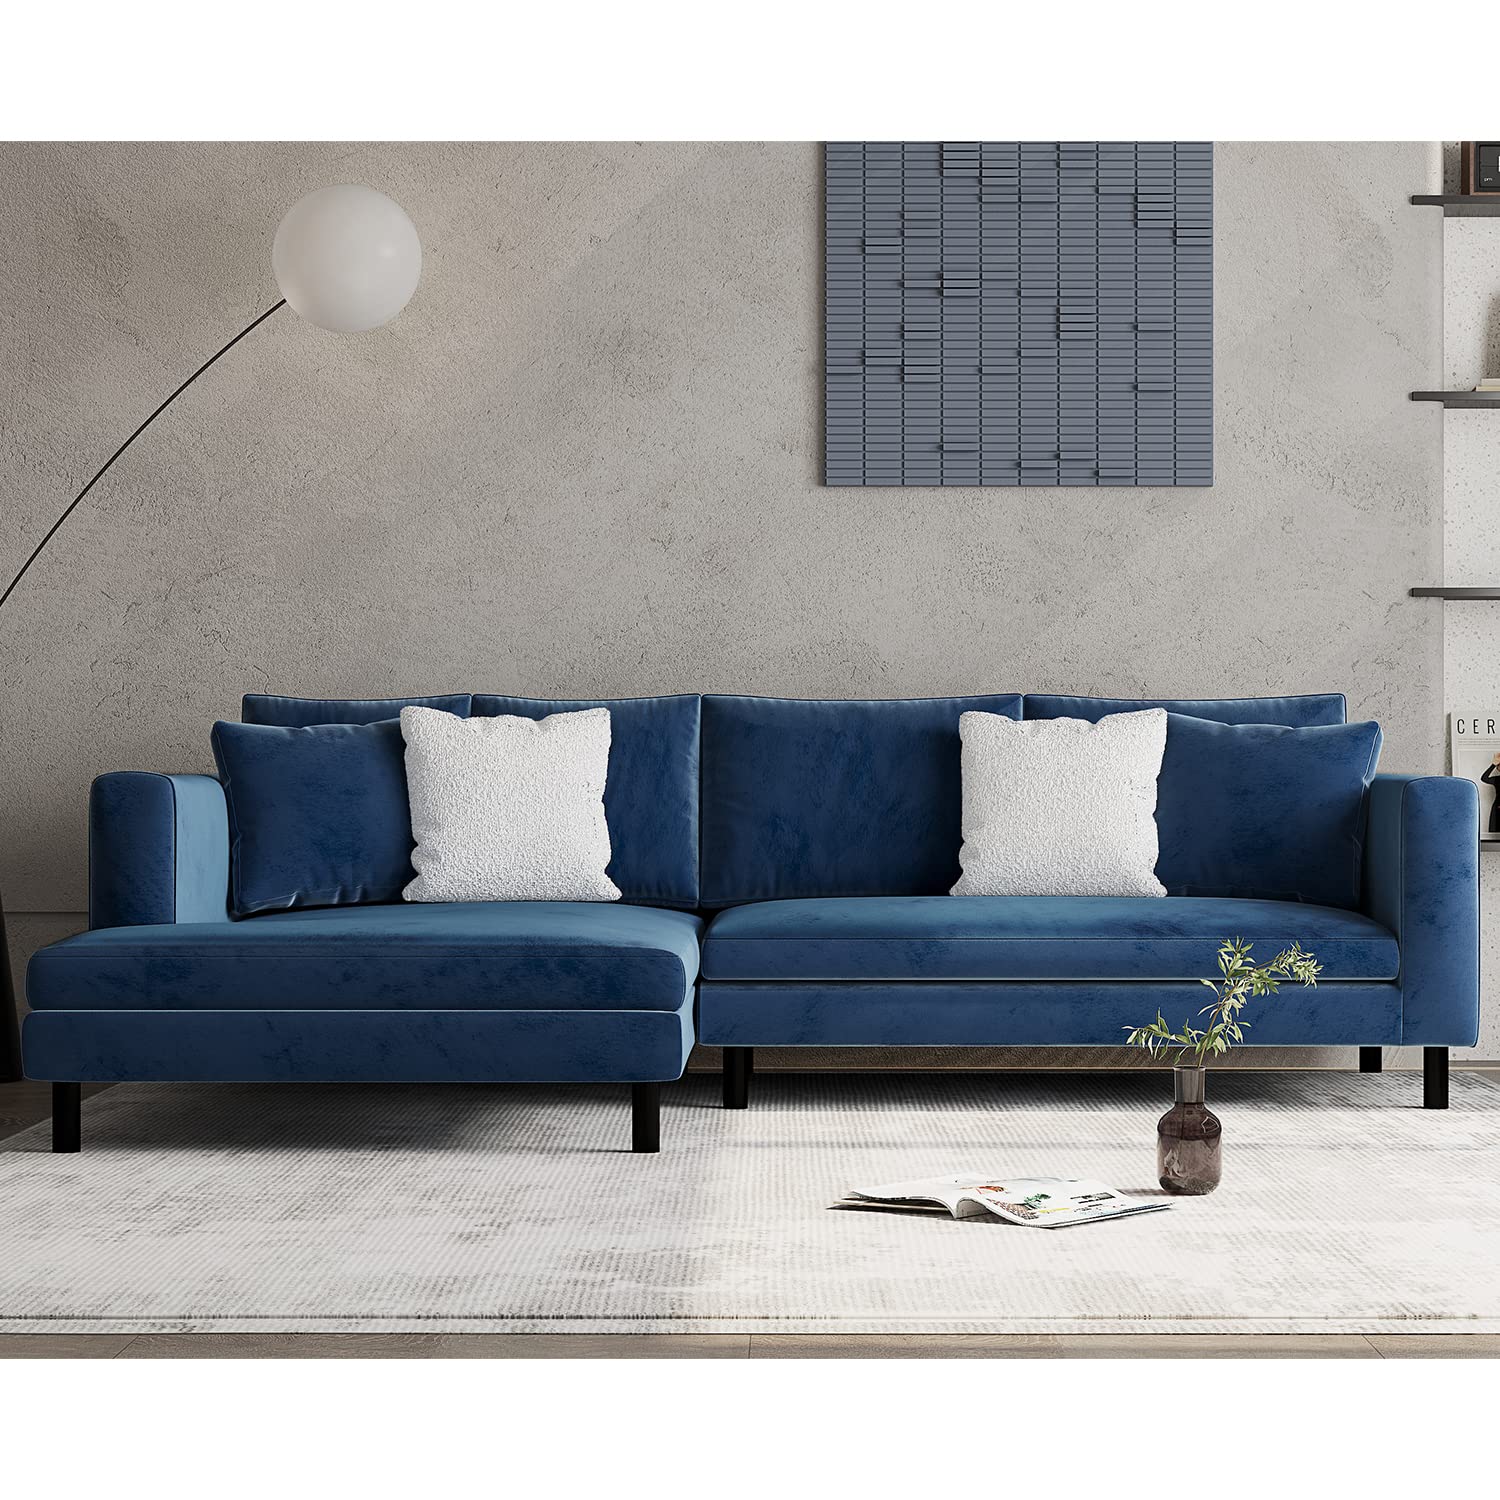 Acanva Modern L-Shaped Large Sofa with Soft Velvet Fabric, Extra Wide chaise Lounge couch for Living Room, Dark Blue